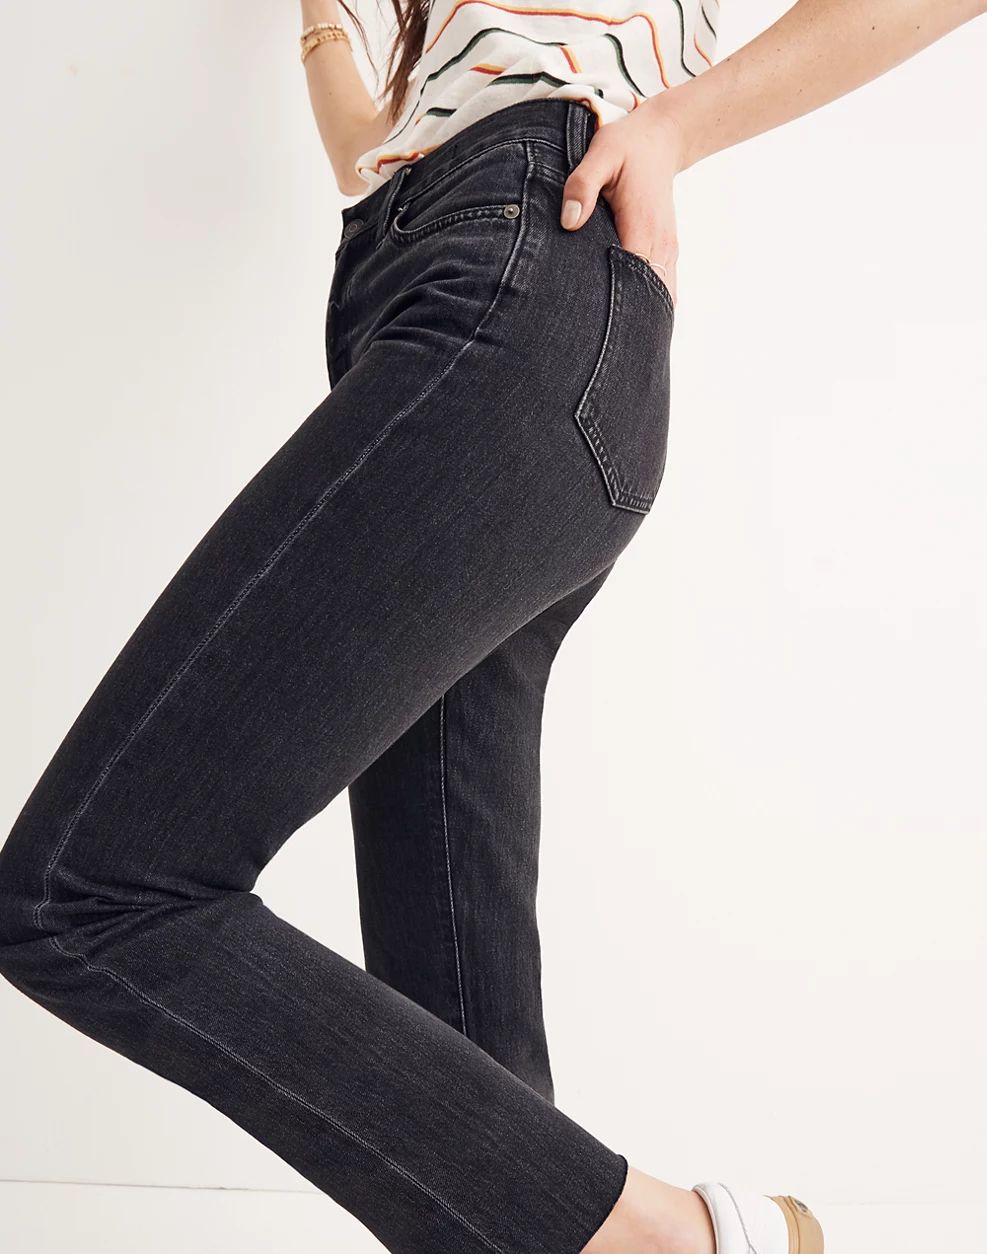 The Perfect Summer Jean in Crawley Black Wash | Madewell